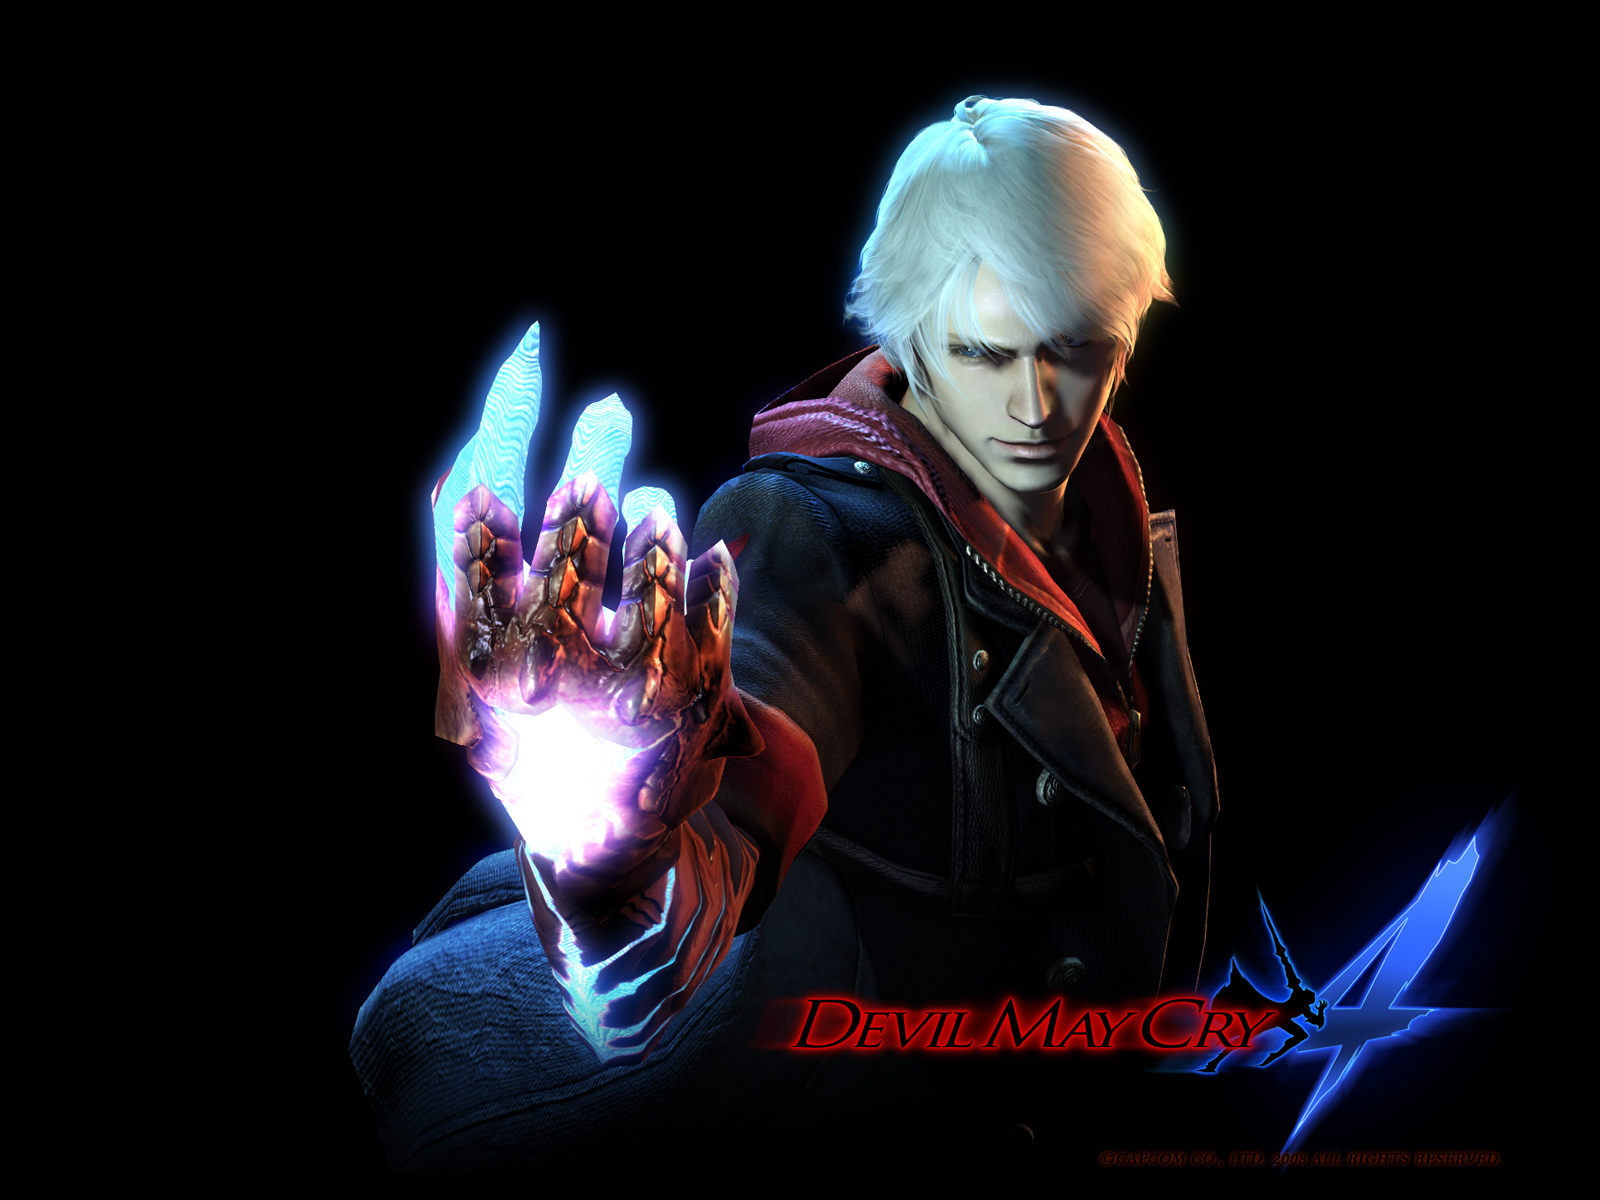 Devil May Cry 4 Devil_may_cry_4_wallpaper_7e3b26c6